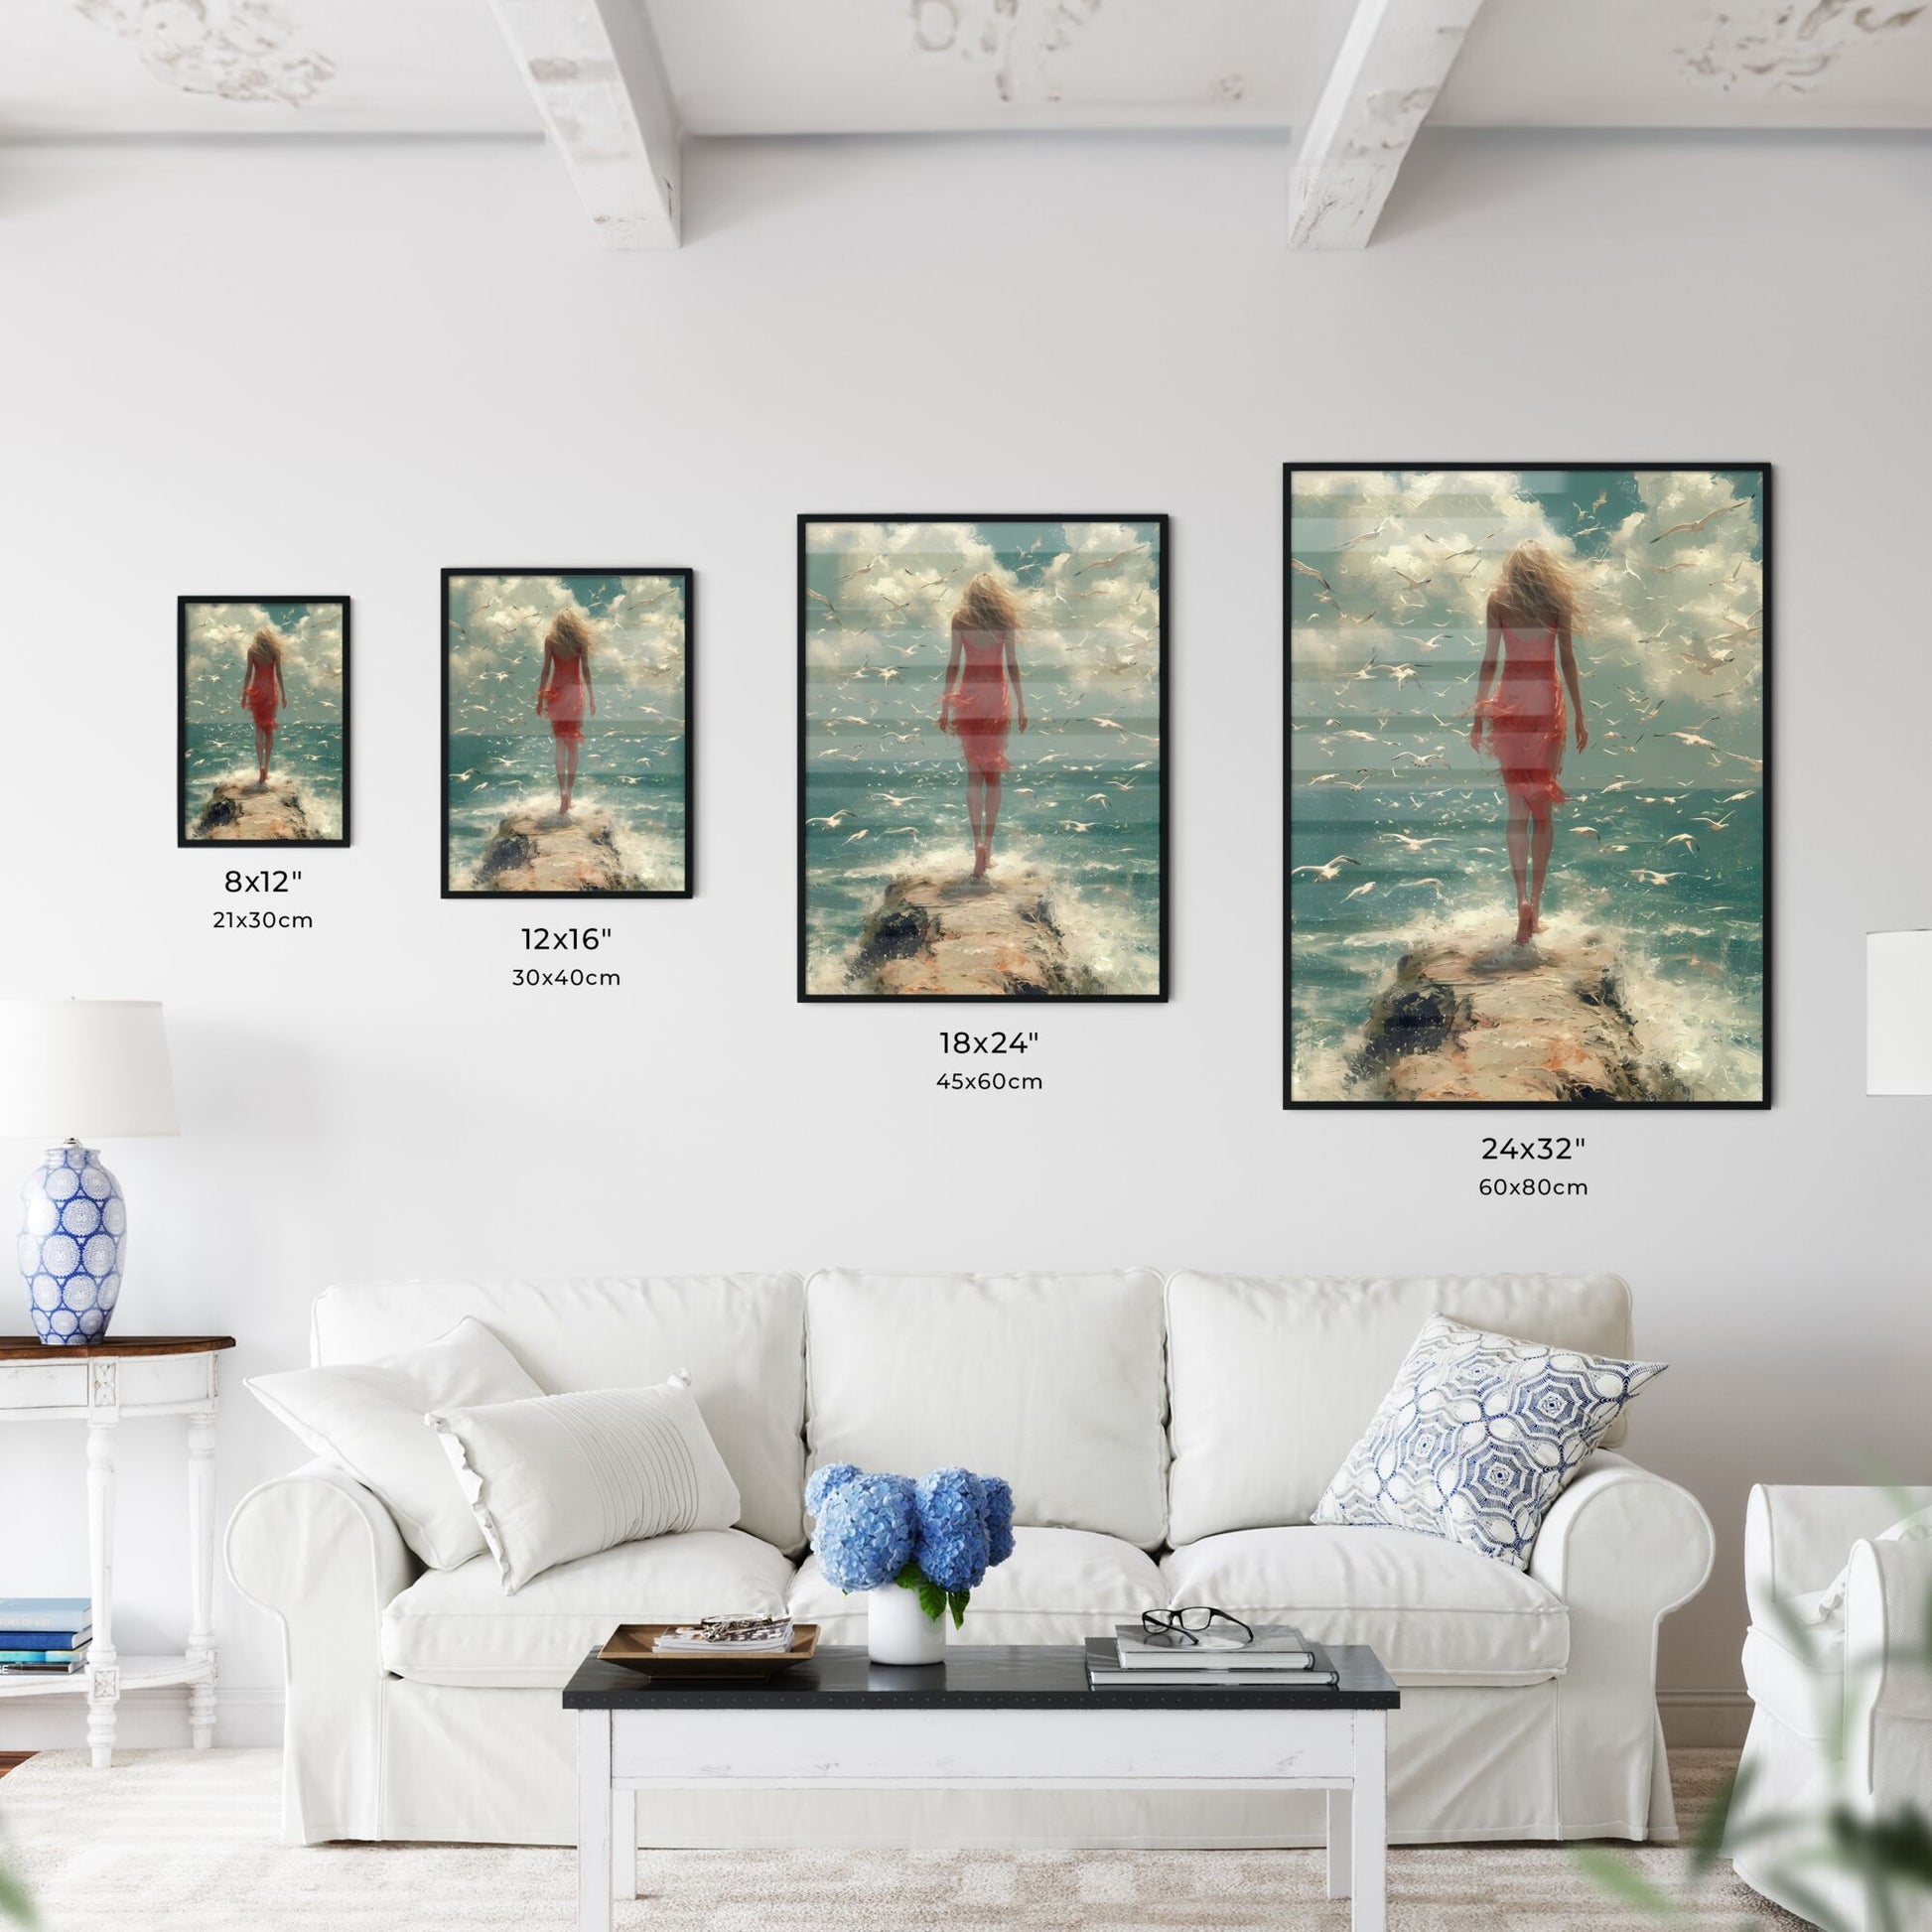 A Poster of Beach Painting, Vintage Sea Landscape Print - A Woman In A Red  Dress Standing On A Rock Surrounded By Seagulls by HEBSTREIT